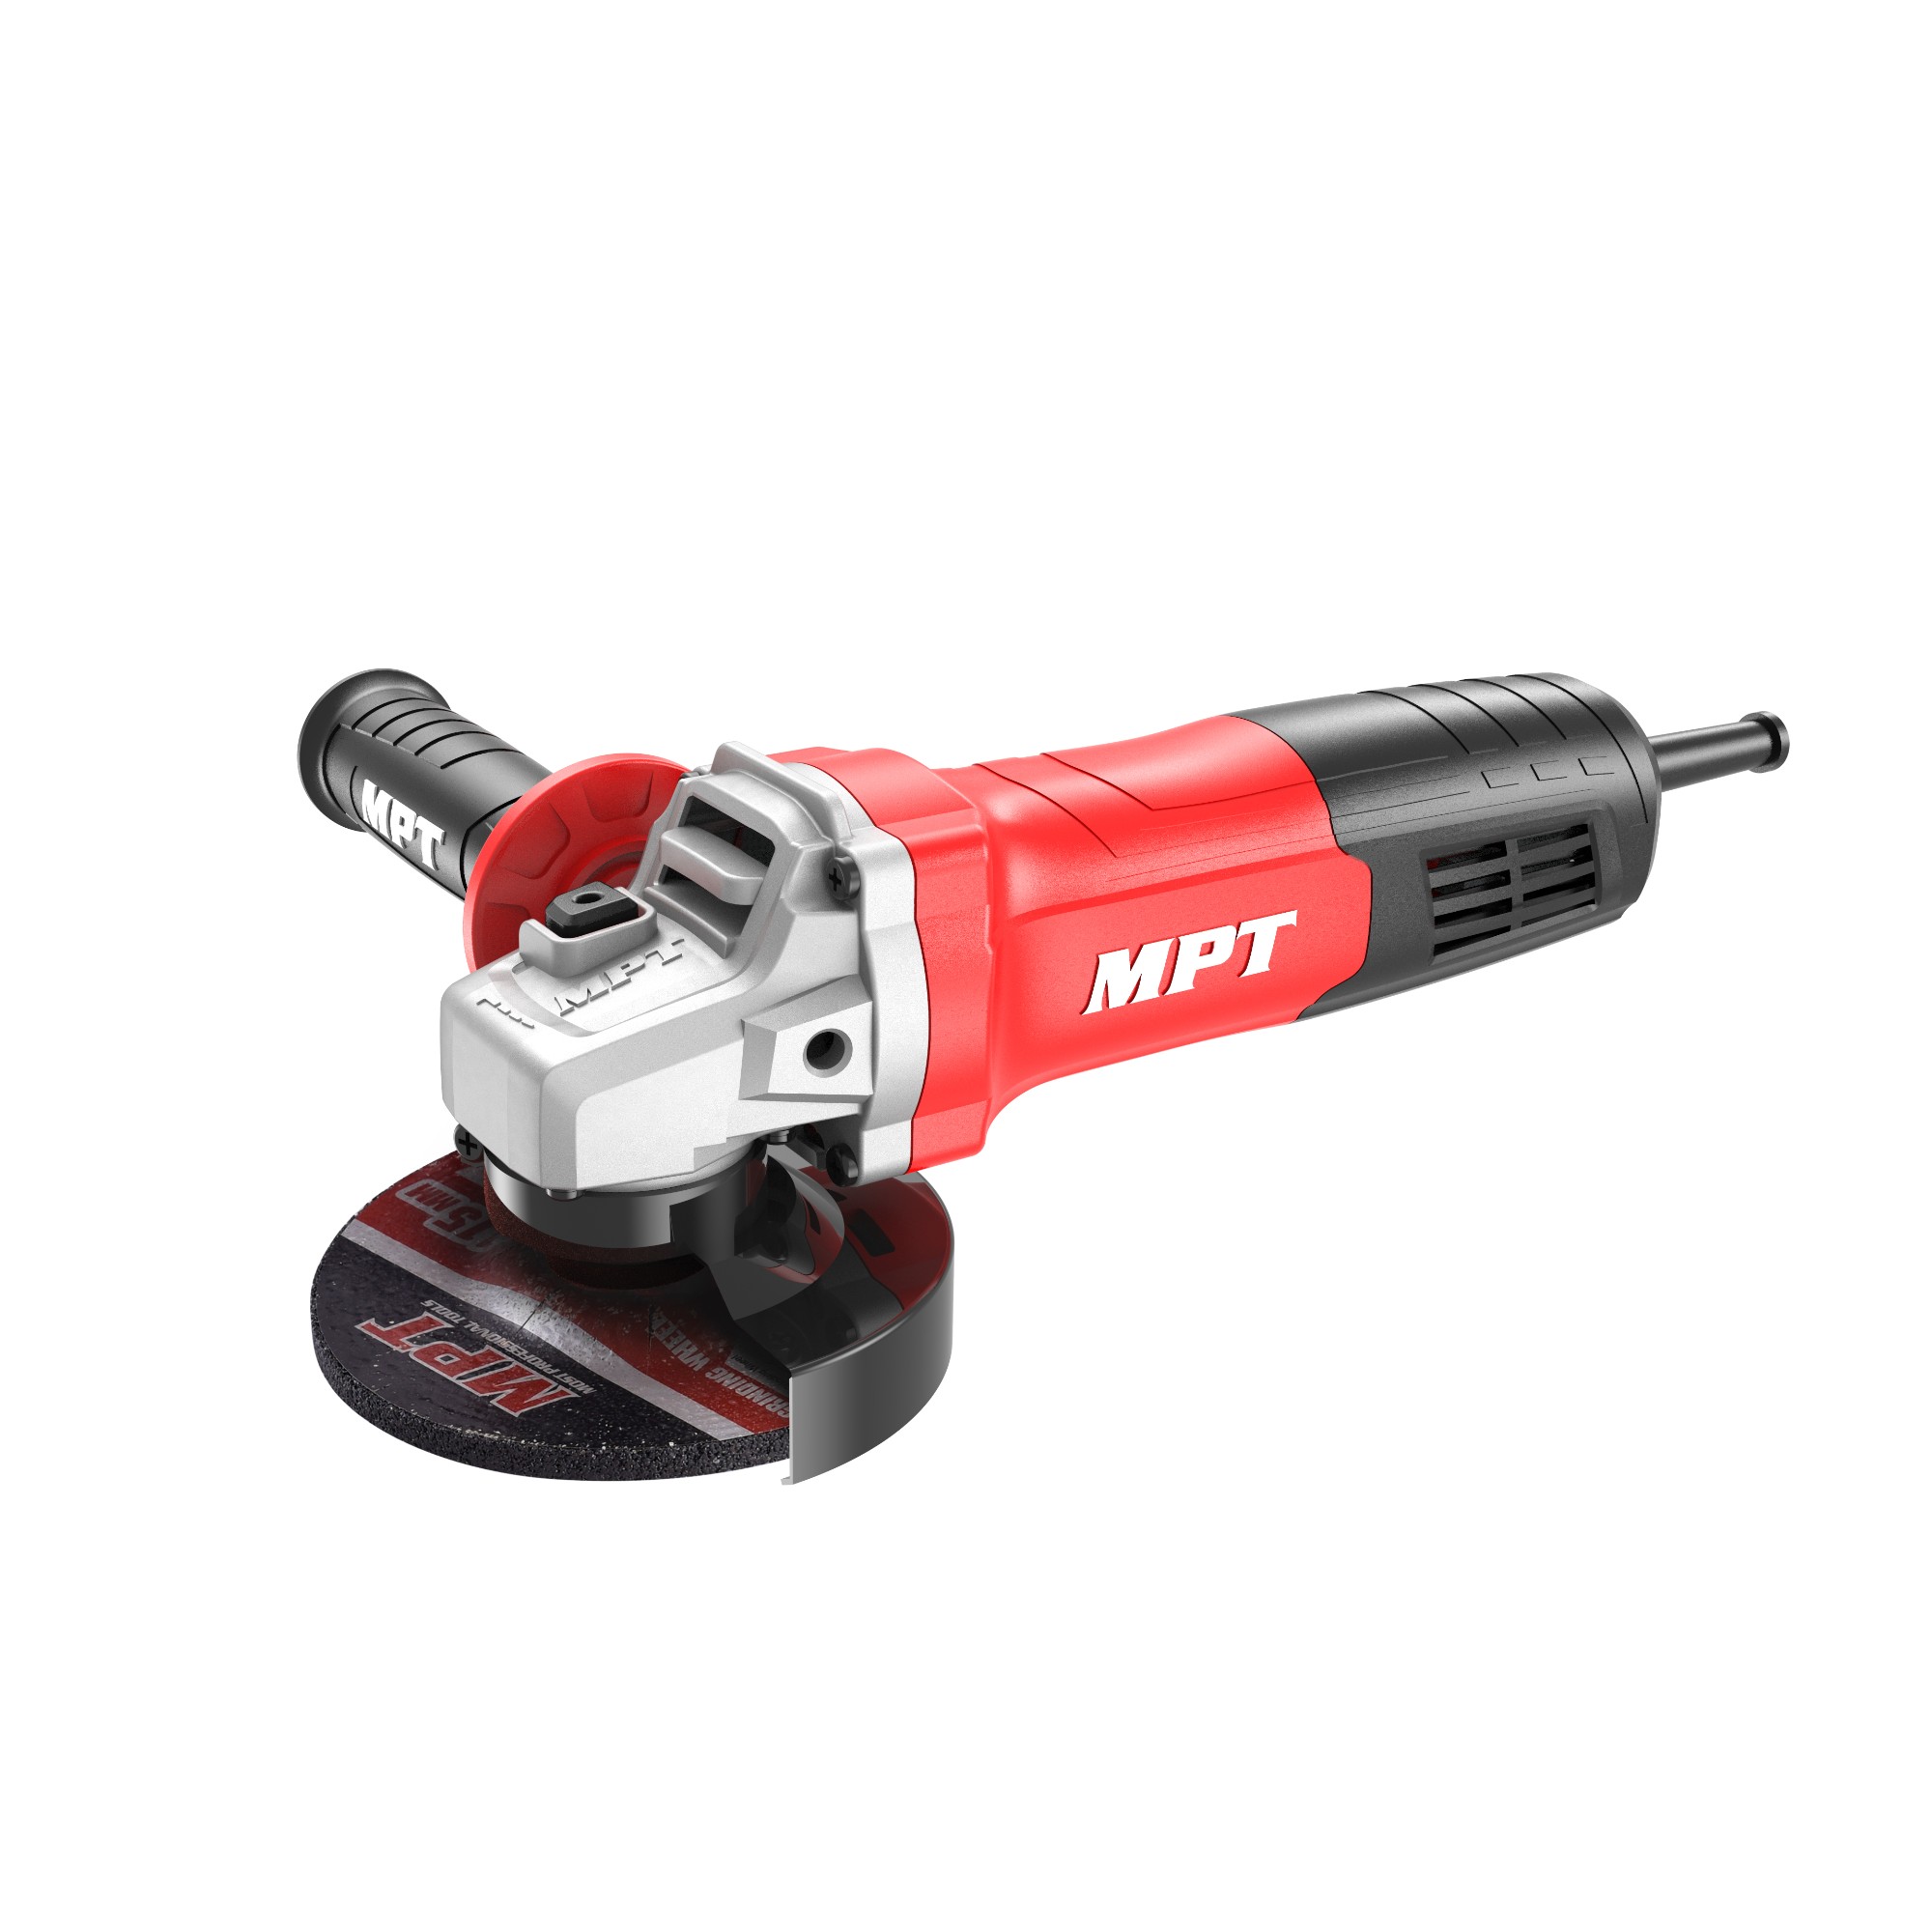 MPT 800w Angle Grinder (MAG8008R 100mm 800W)